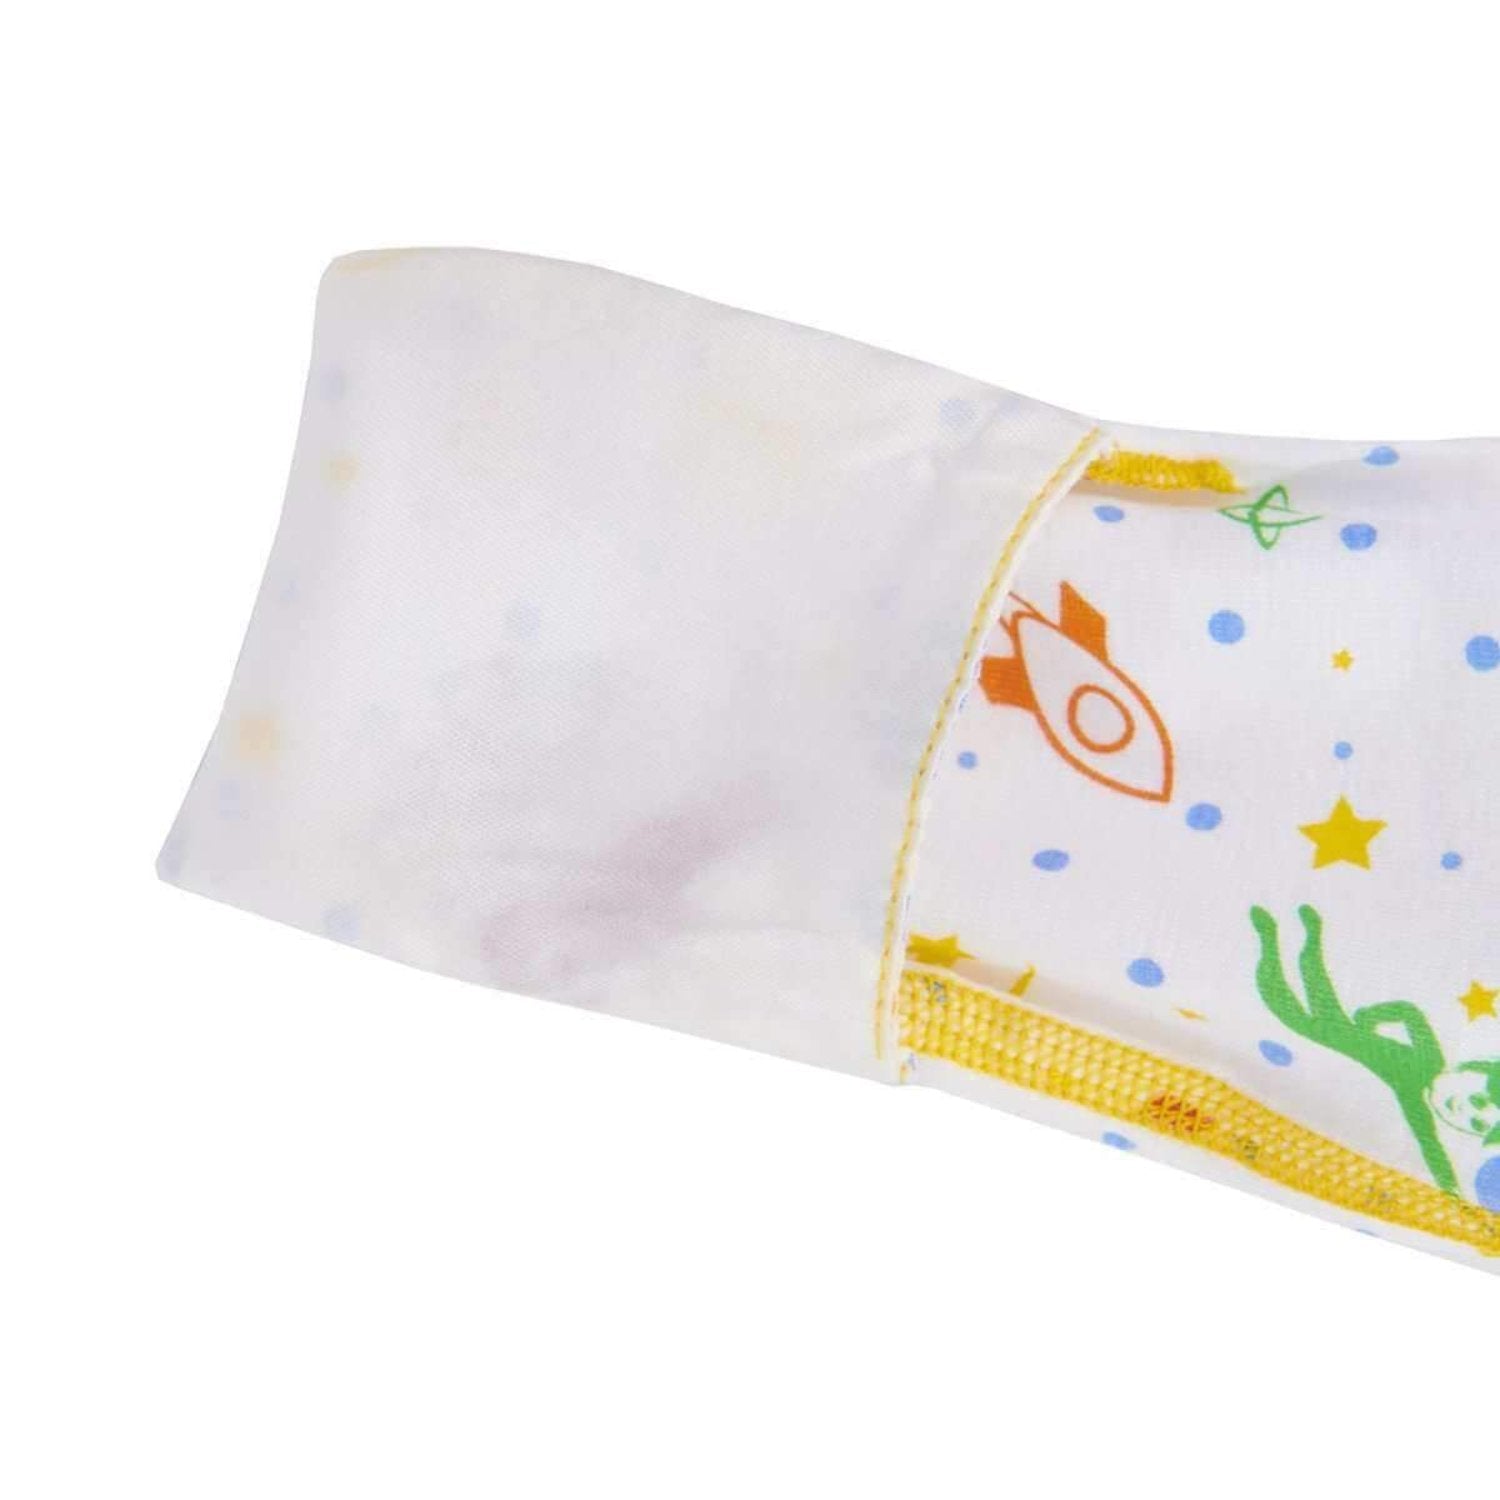 "Anti Scratch mittens for babies and kids with eczema" 